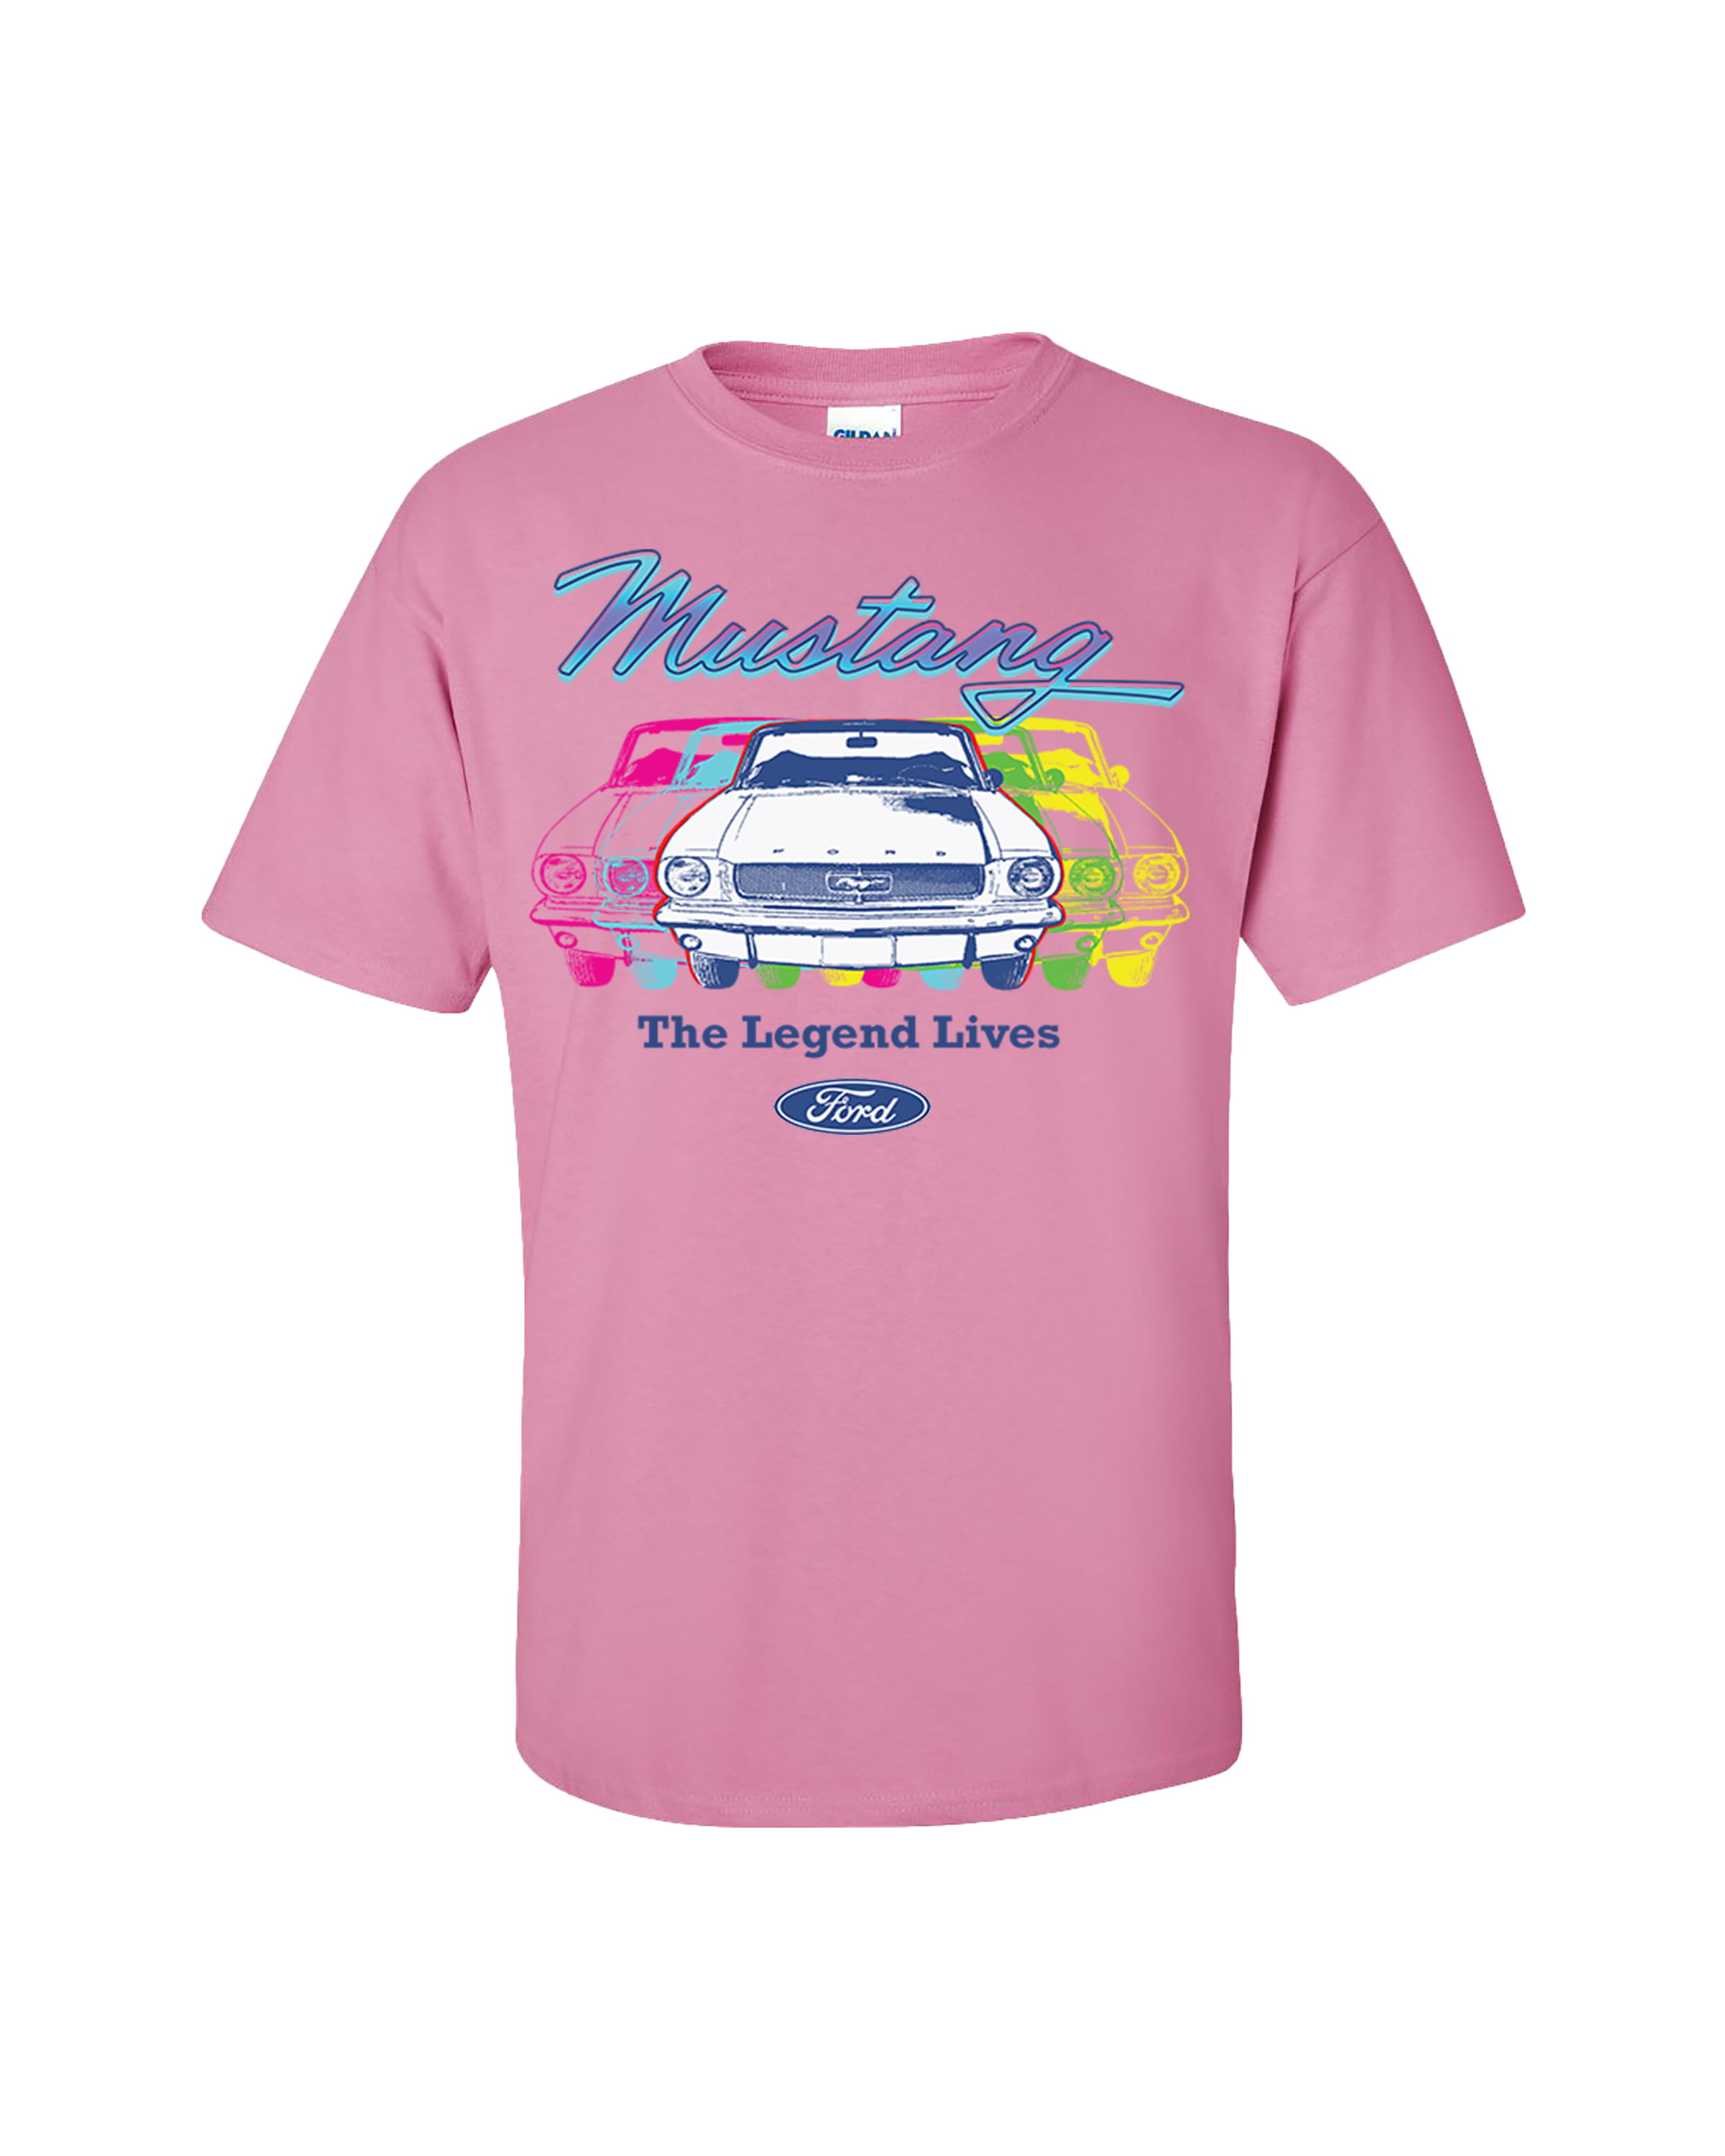 Ford Mustang The Sleeve Legend T-shirt-Pink-xxxl Retro Lives Short Graphic